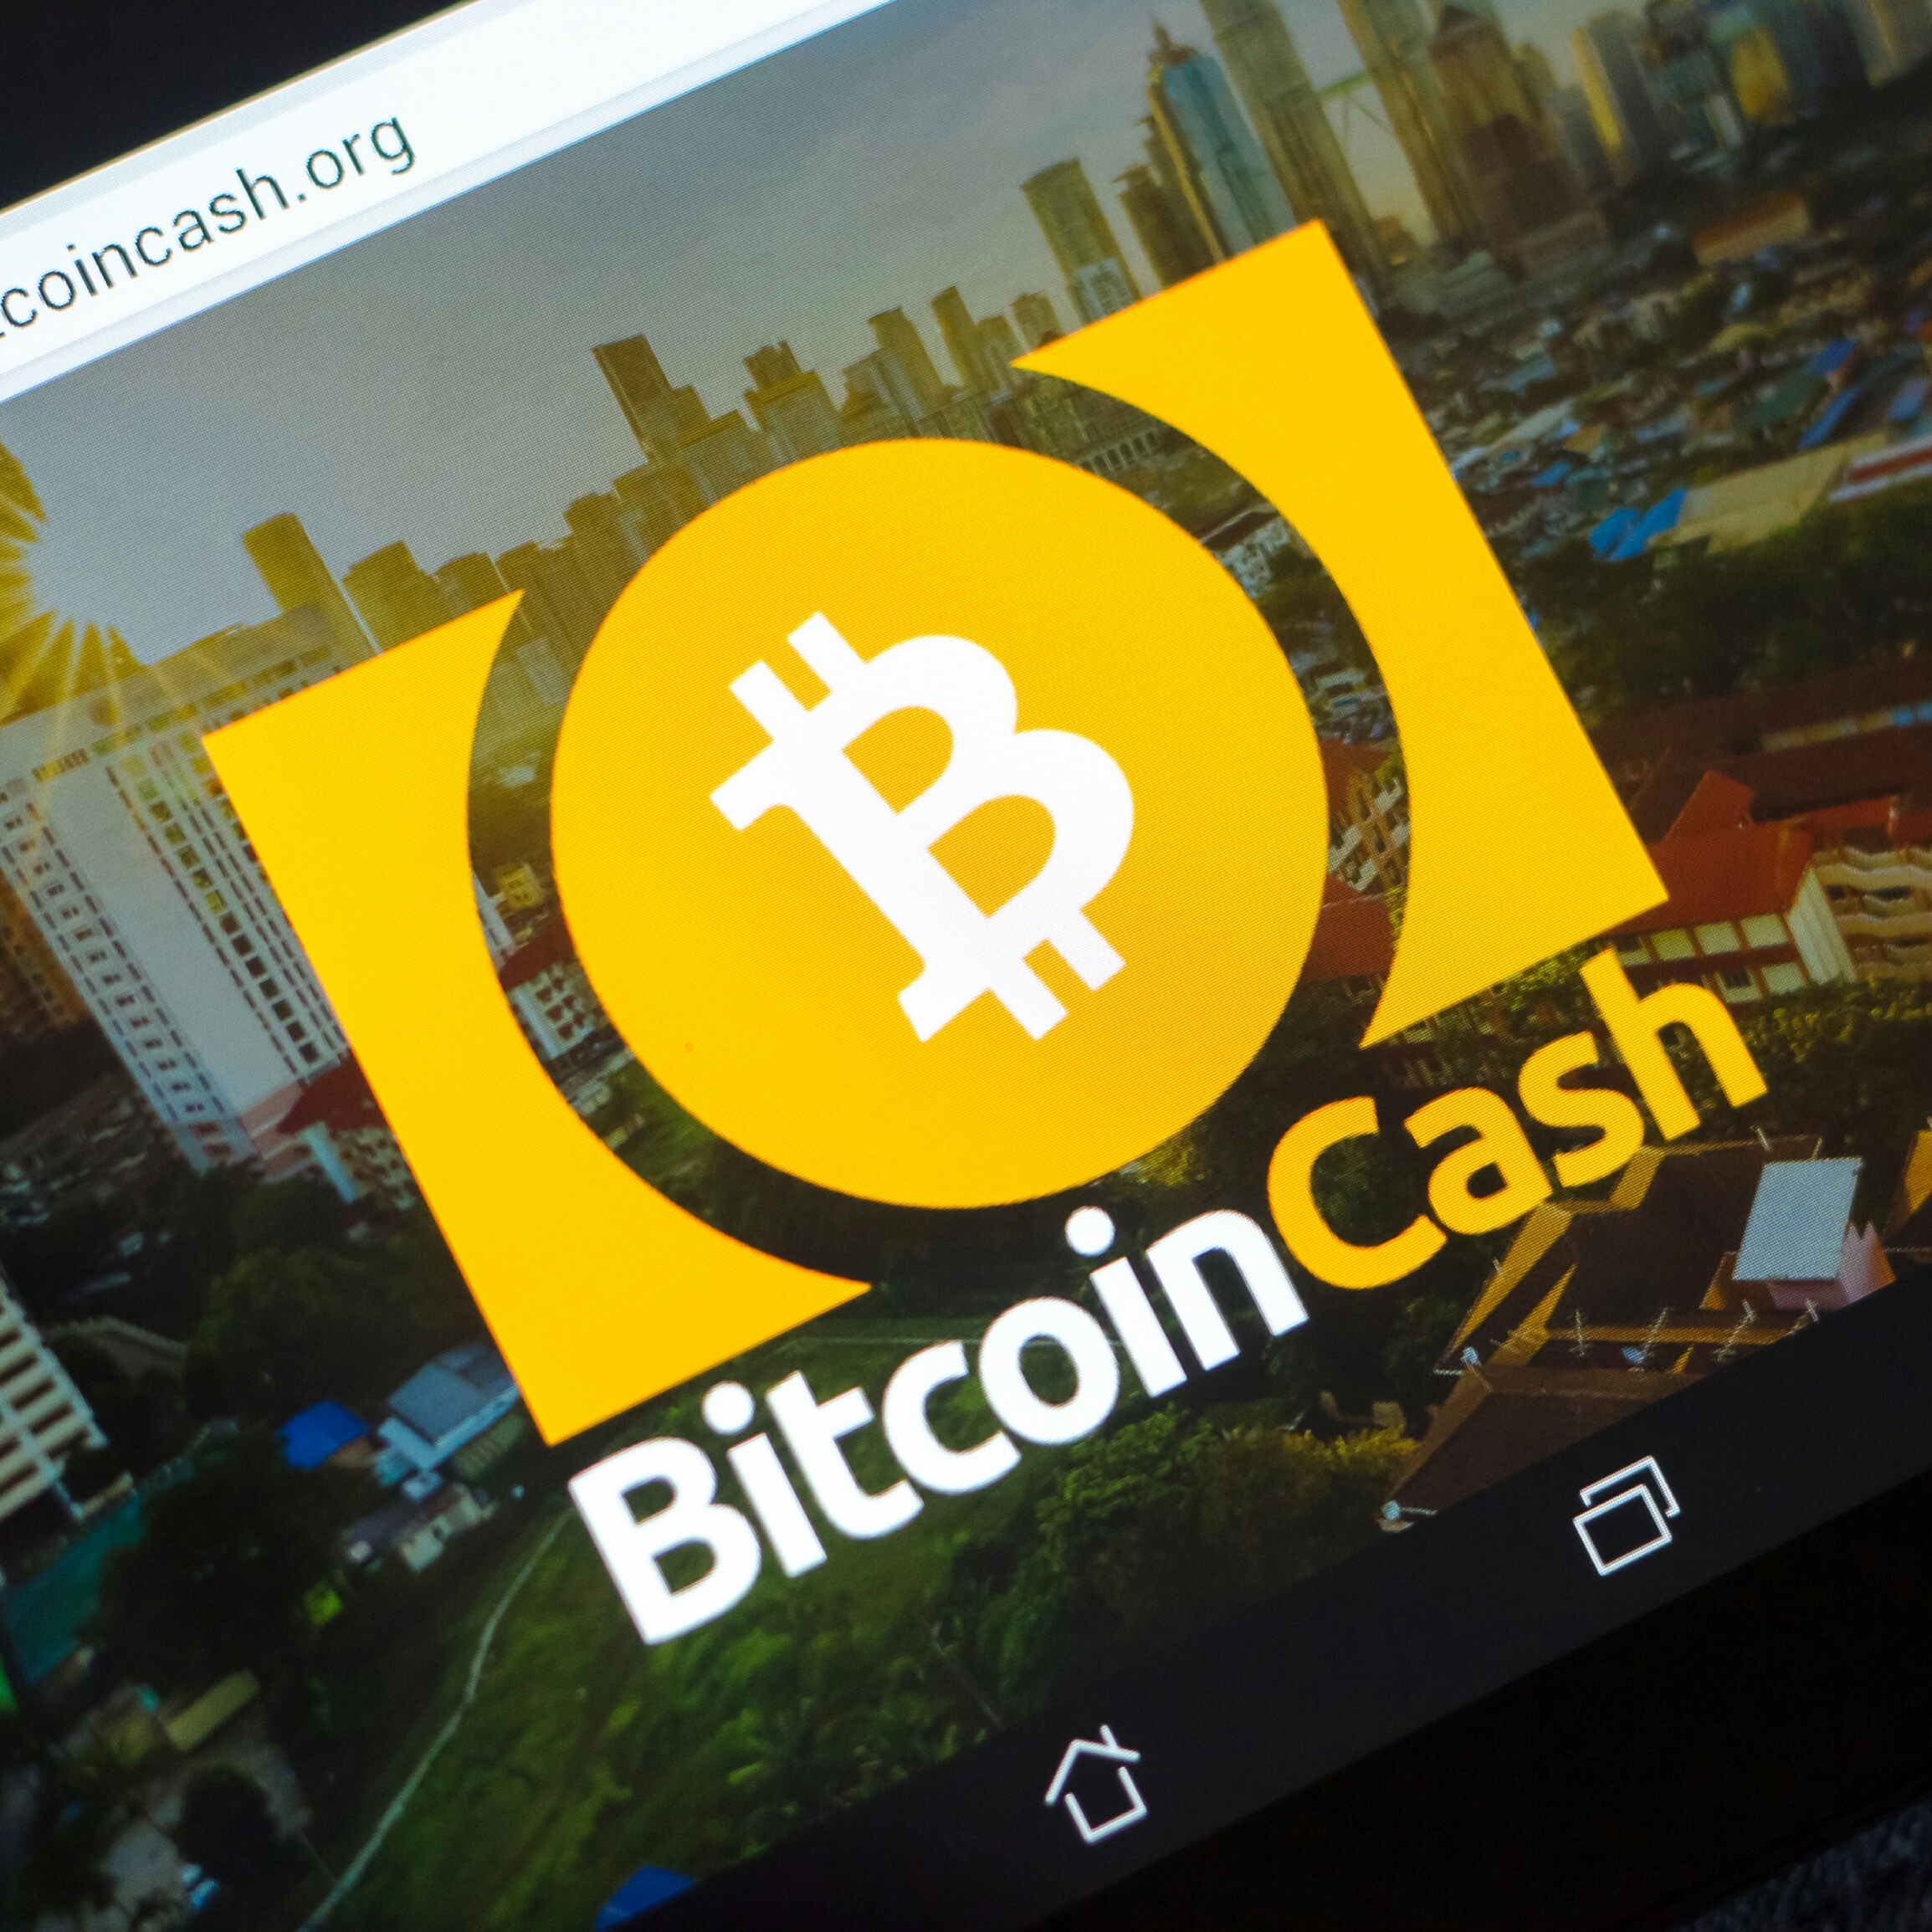 Jewelry Maker Marks Jewelers Now Accepts Bitcoin Cash for Payments